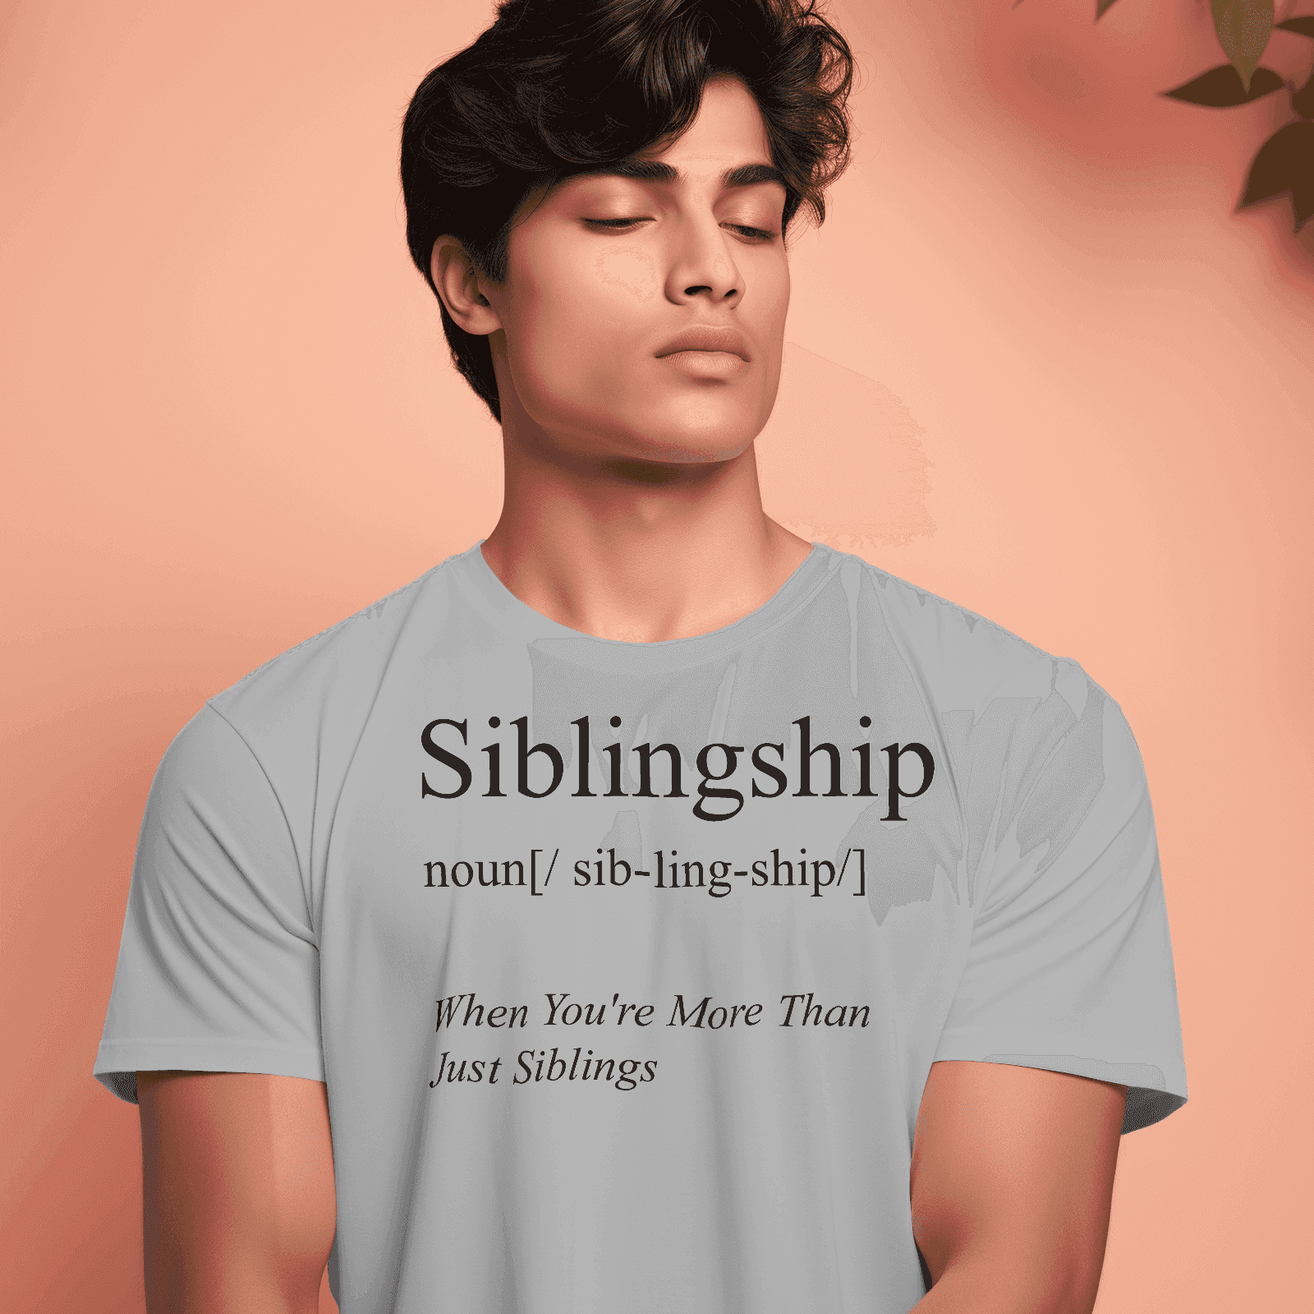 Siblingship Chronicles Men's Bonding T-Shirt - United in Laughter, Connected by Love